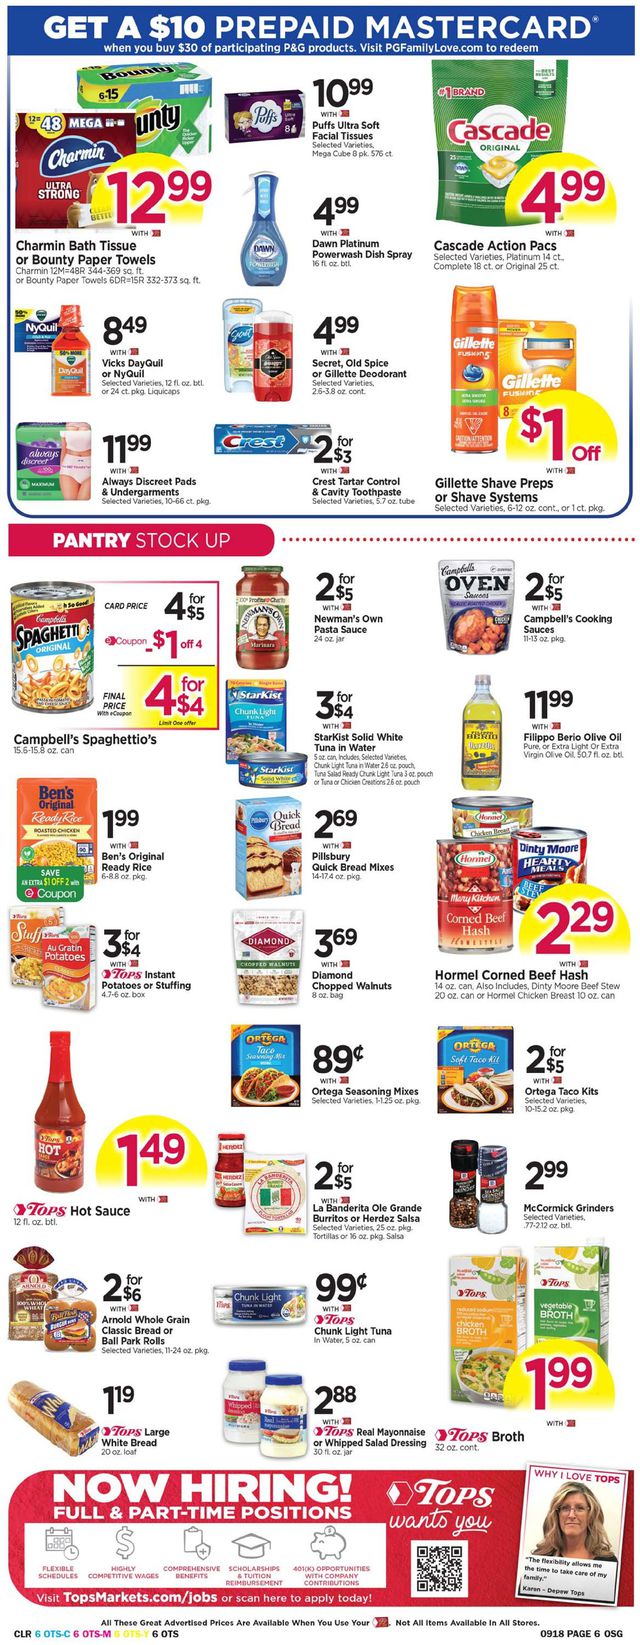 Tops Friendly Markets Ad from 09/12/2021